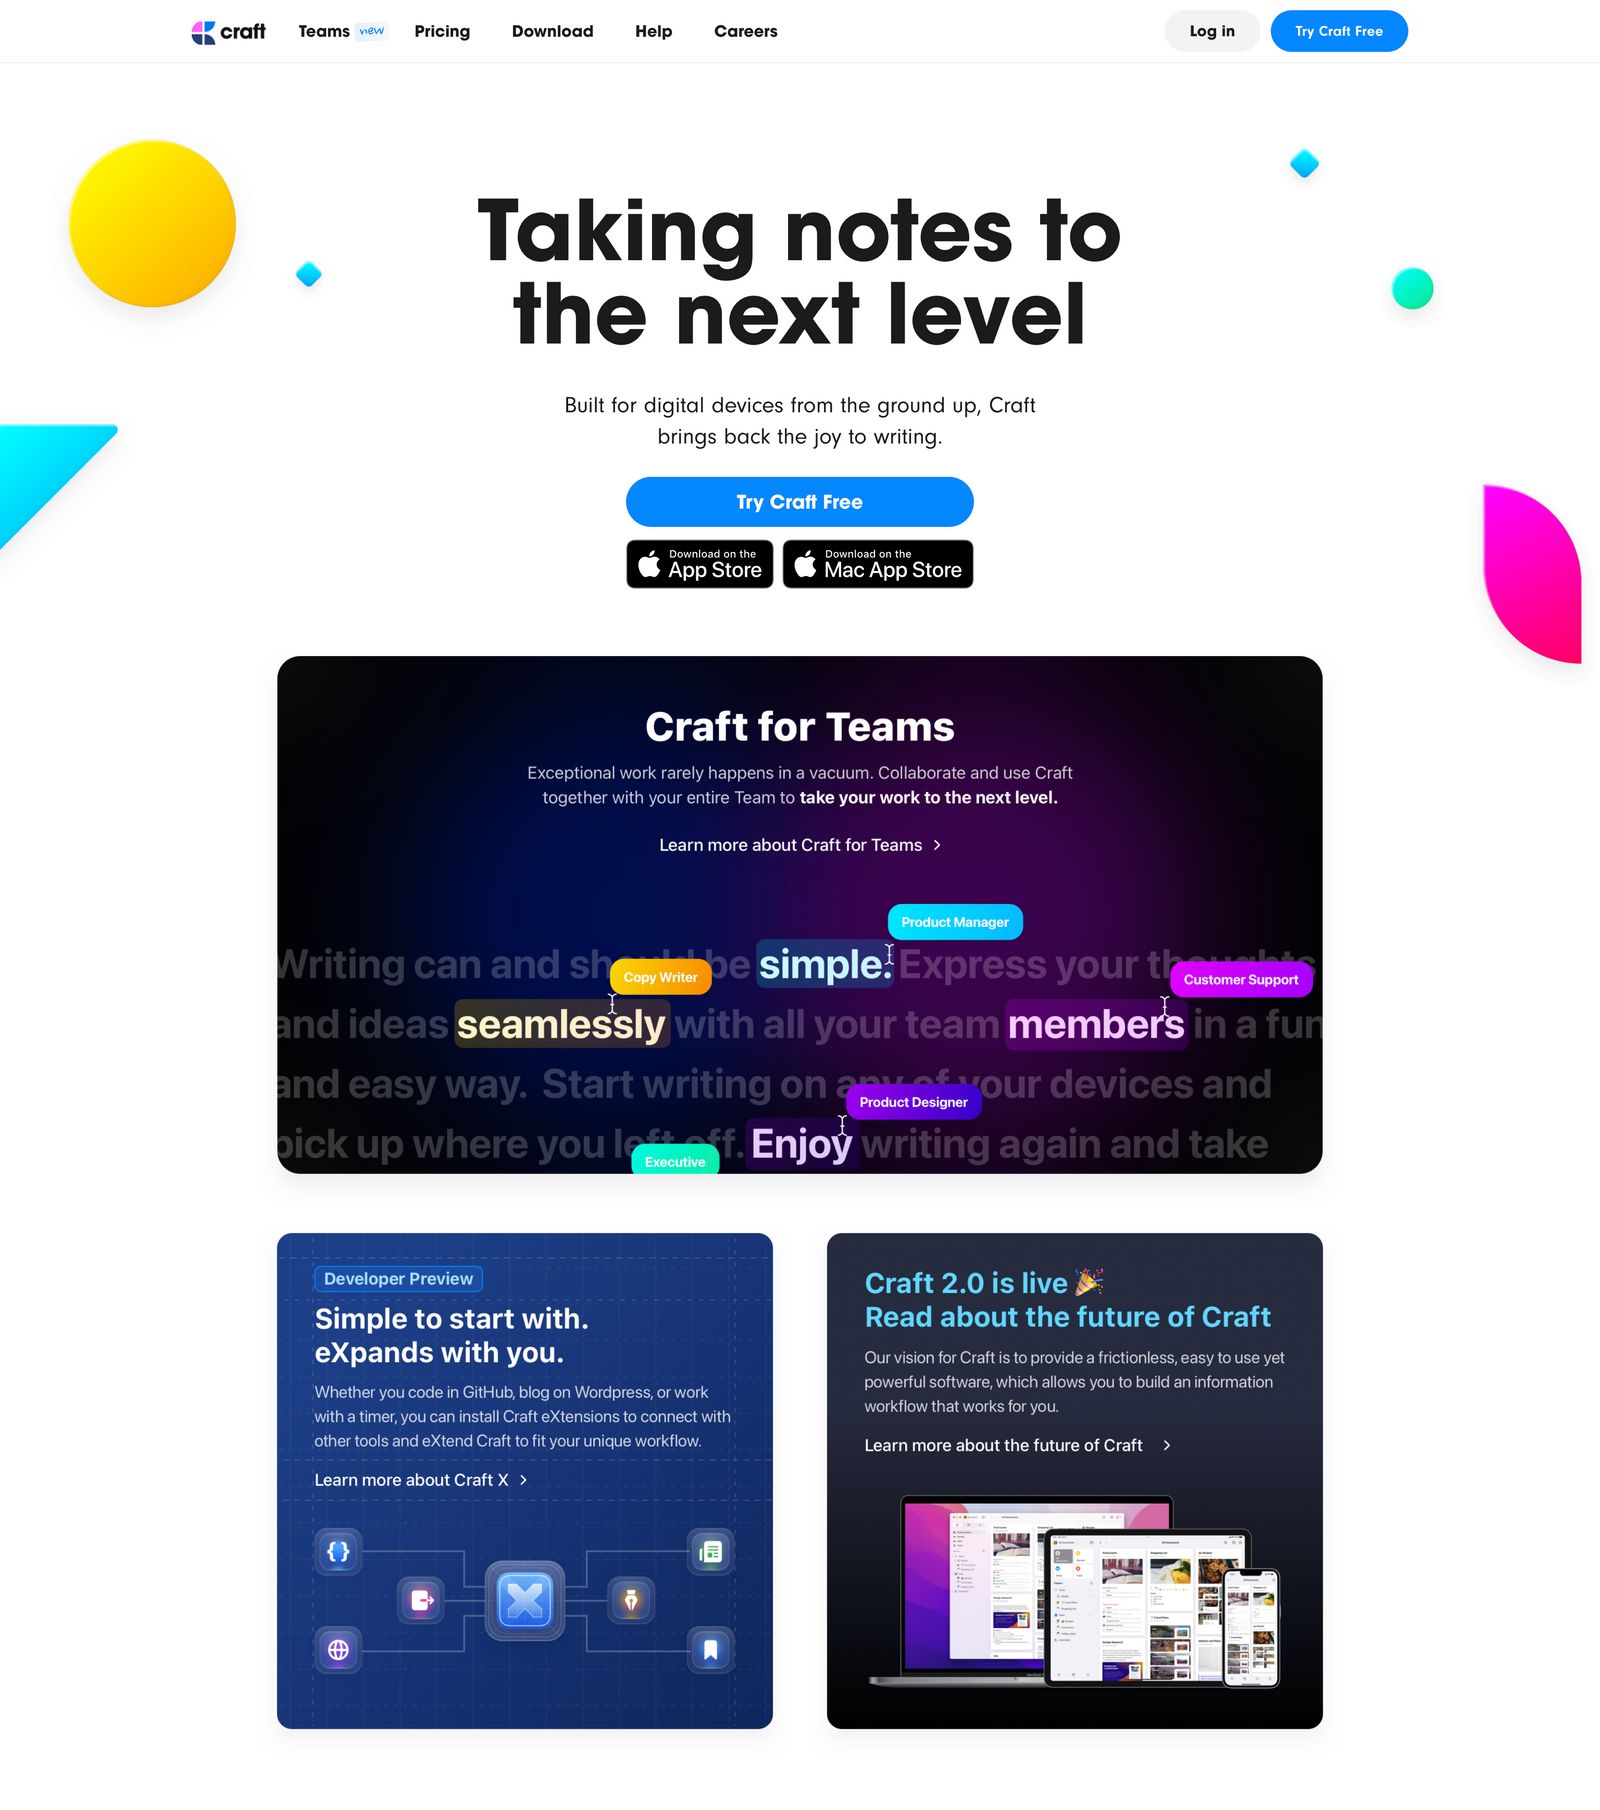 /articles/landing-page-inspiration/landing-page-design-example-2.jpg)_Saas Landing page example from Craft